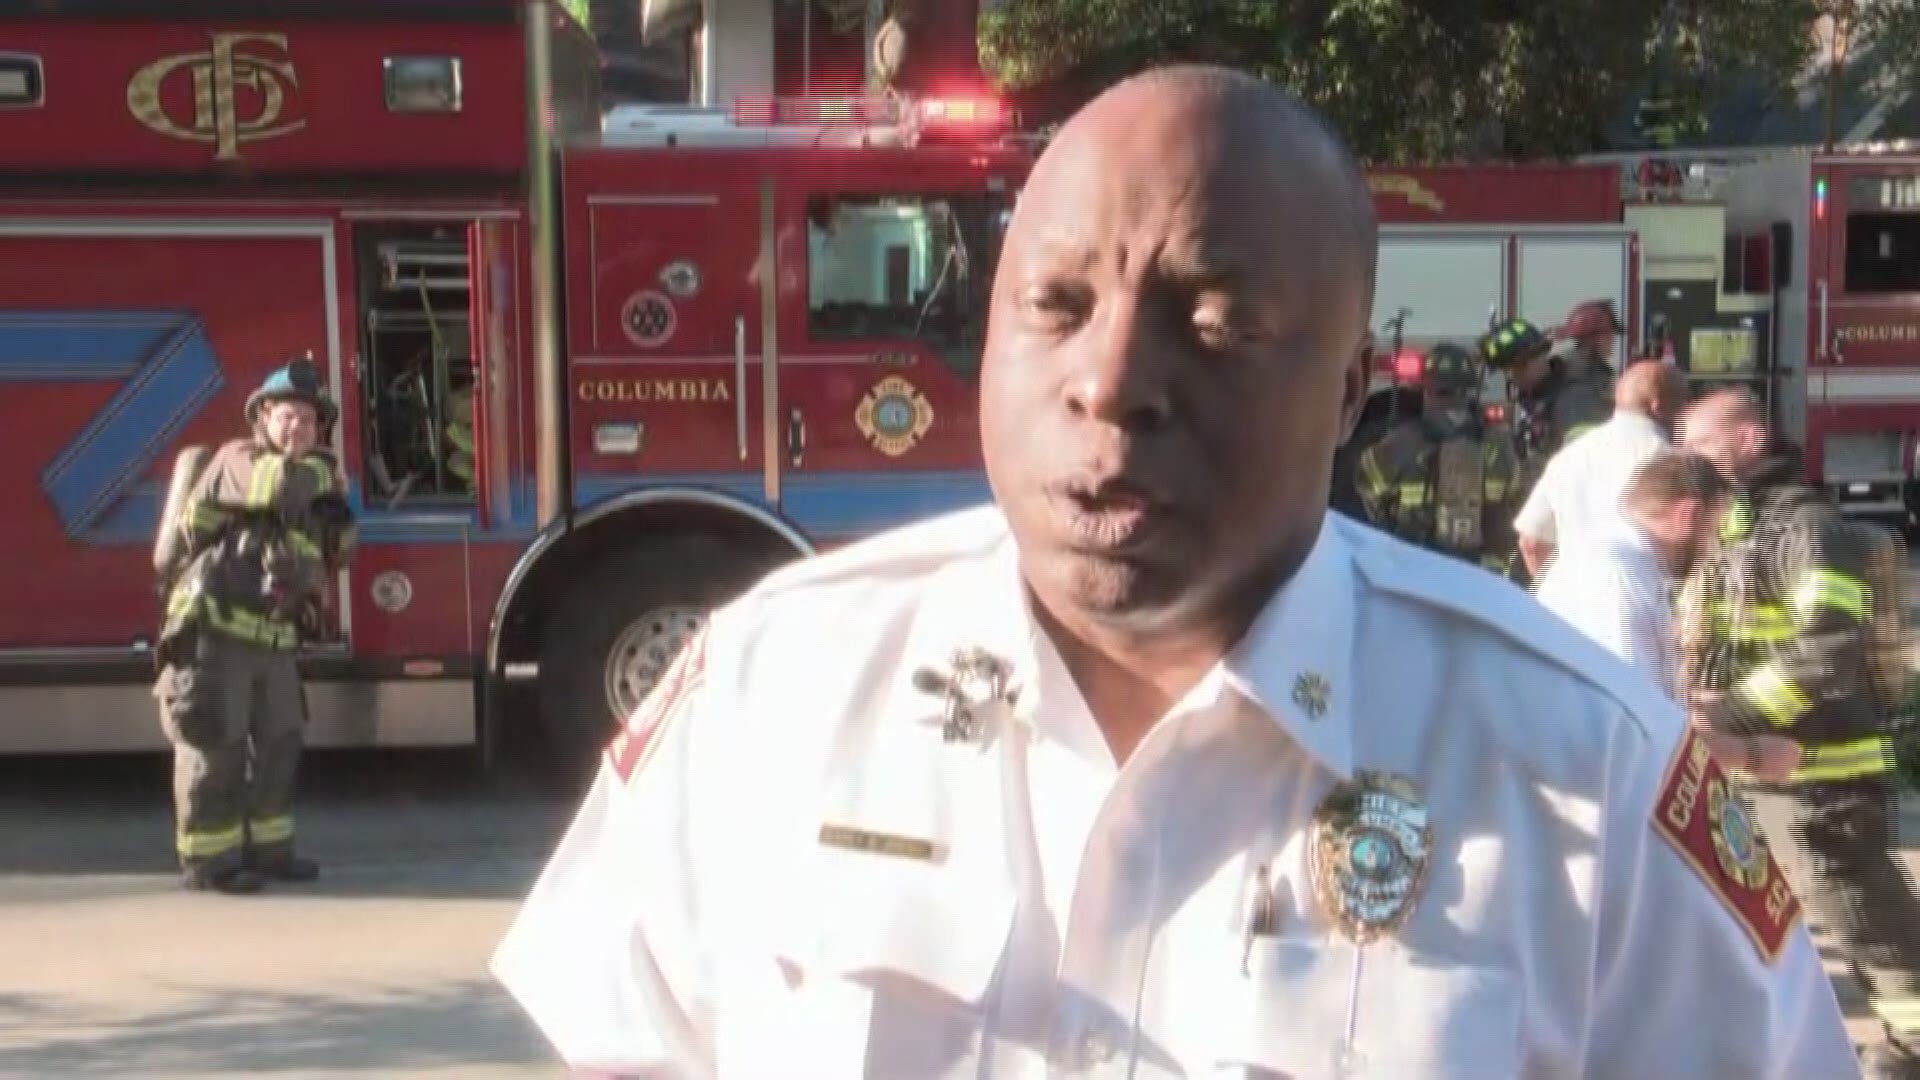 Full interview of Columbia Fire Chief Aubrey Jenkins speaking about a fire at two houses on Greene Street in Columbia.  Chief Jenkins confirmed that the houses are owned by South Carolina Governor Henry McMaster.